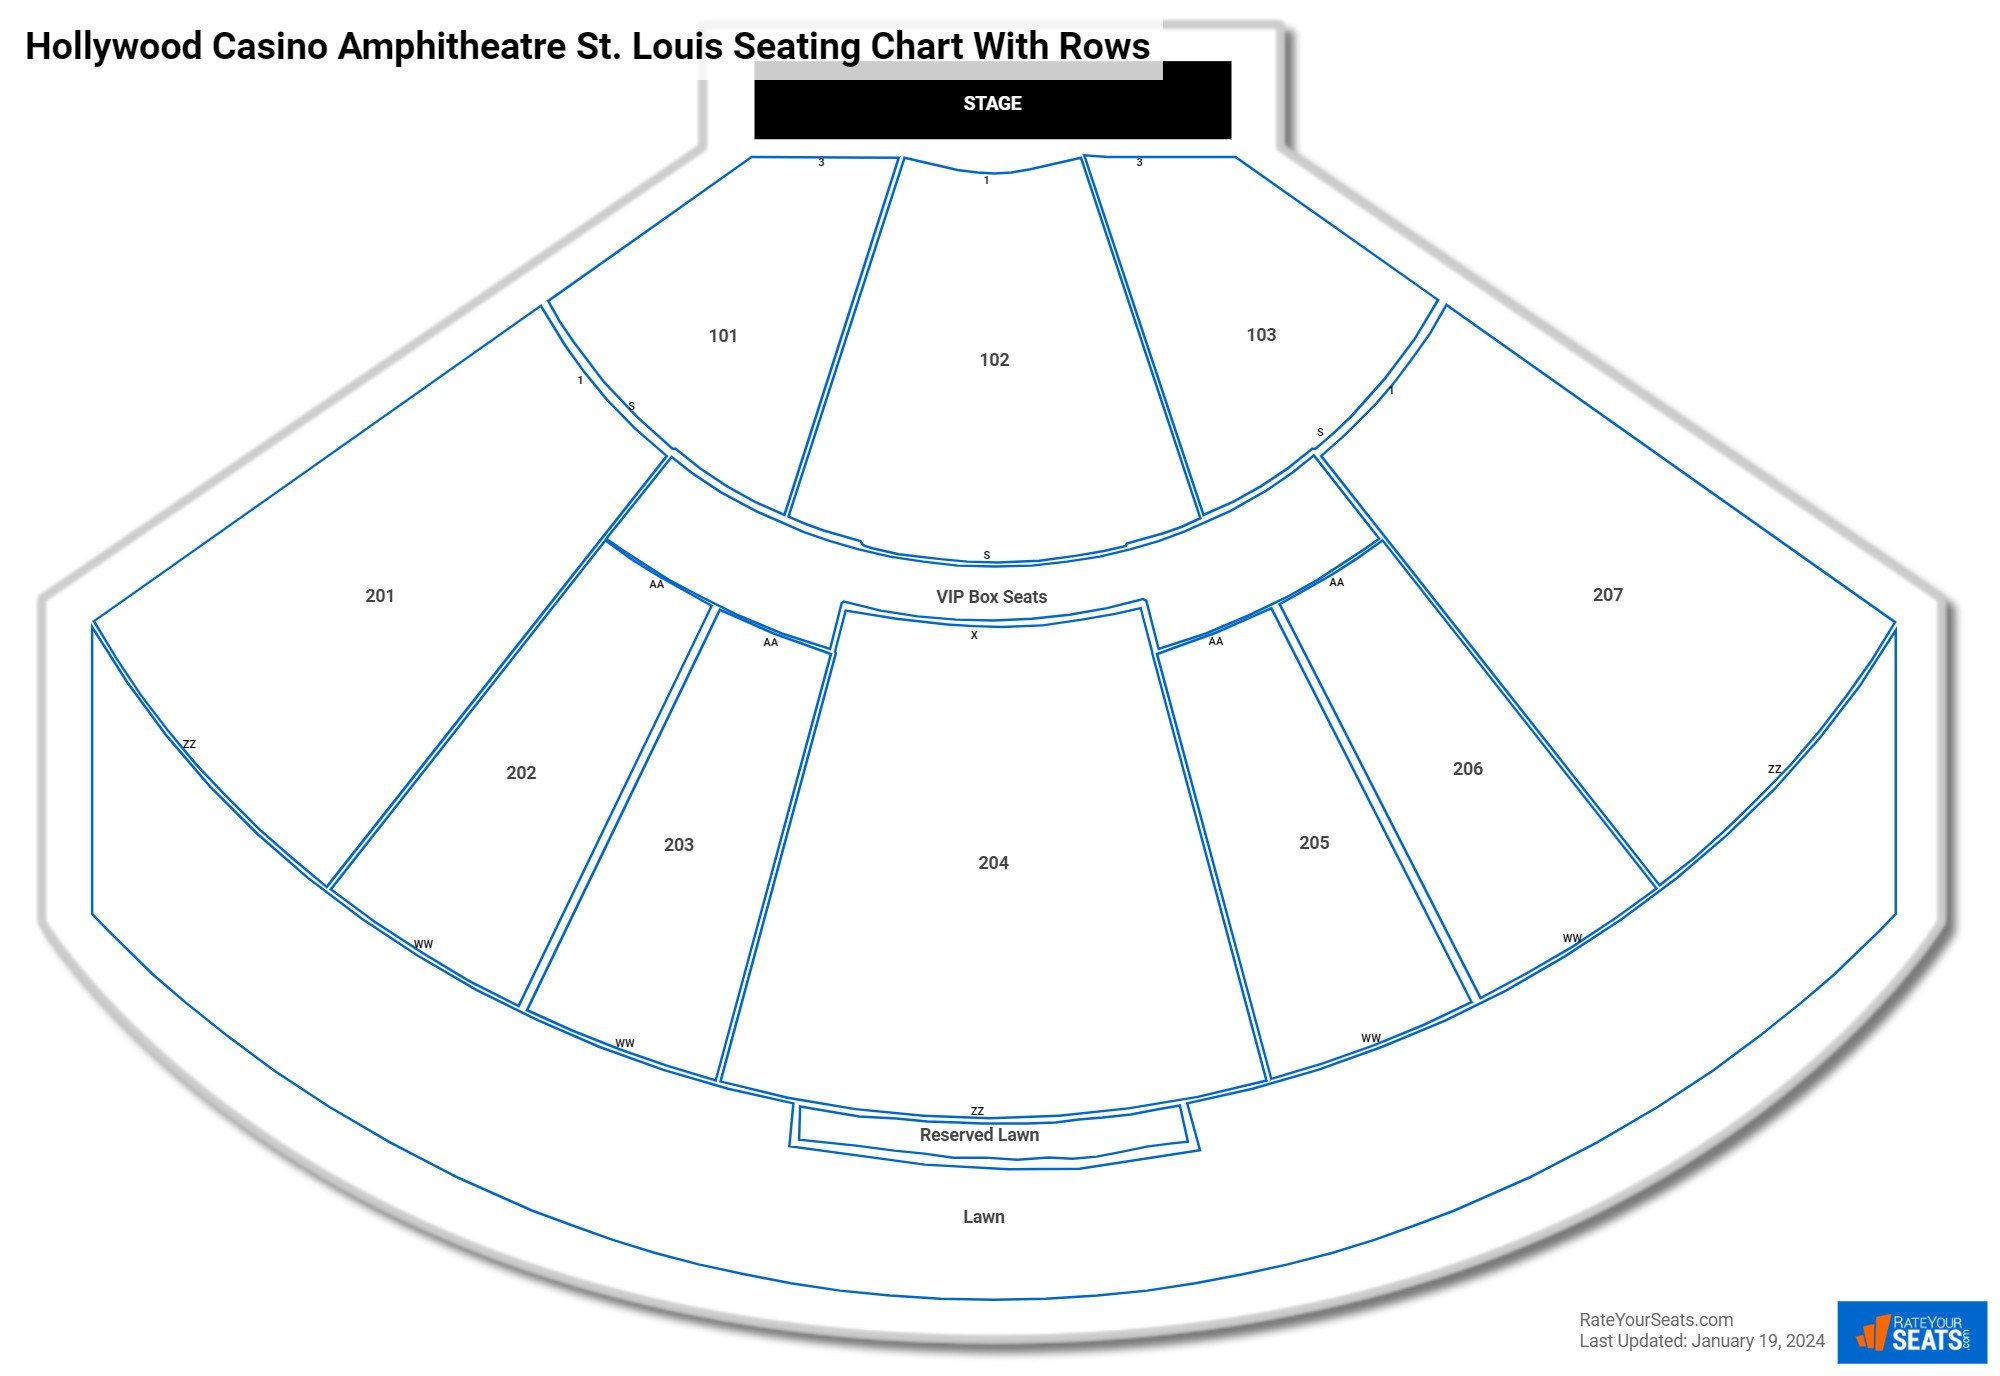 Credit Union 1 Amphitheatre seating chart with row numbers